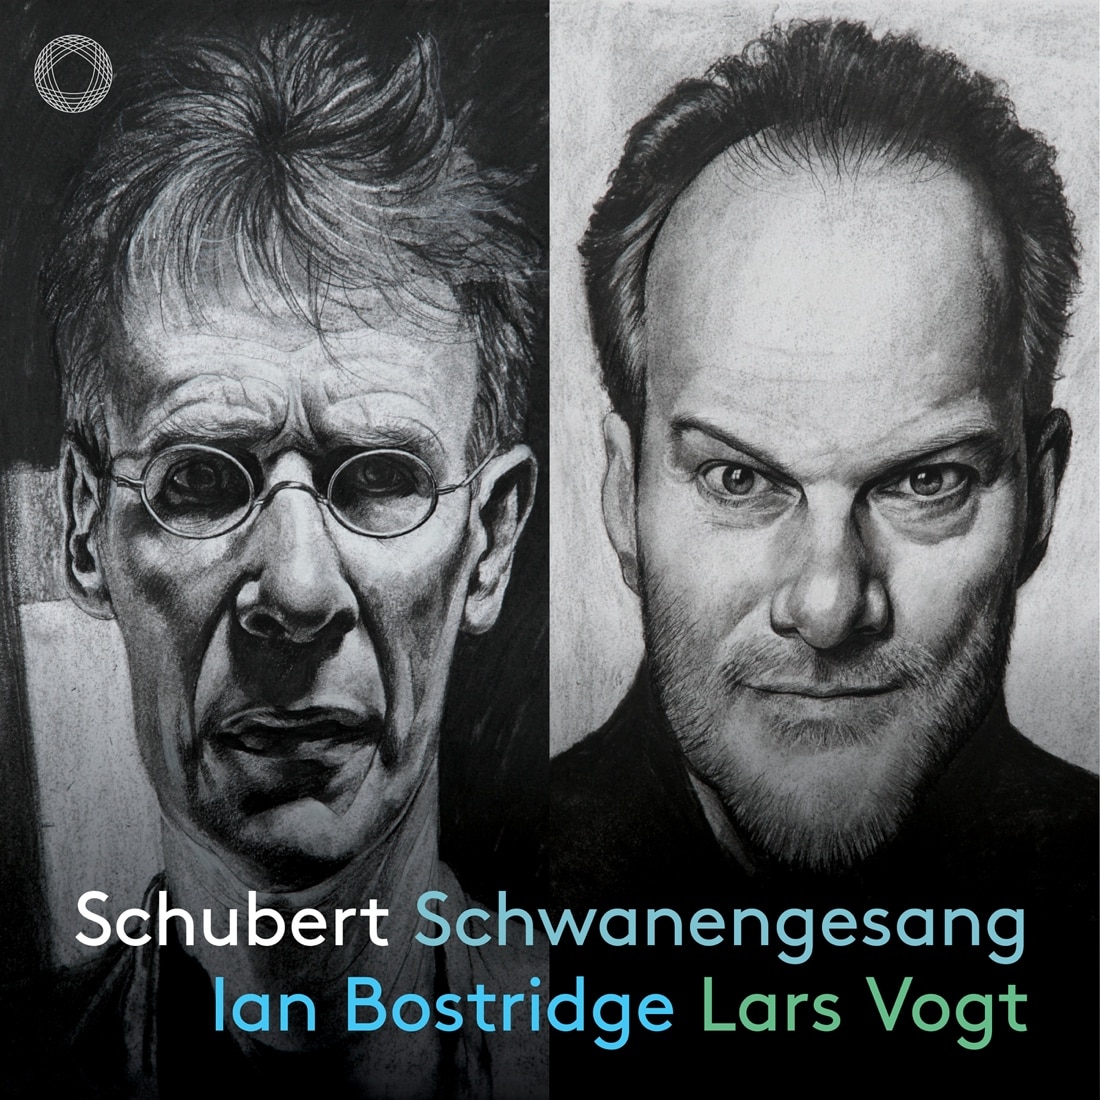 Lars Vogt’s Swansong to be released next week